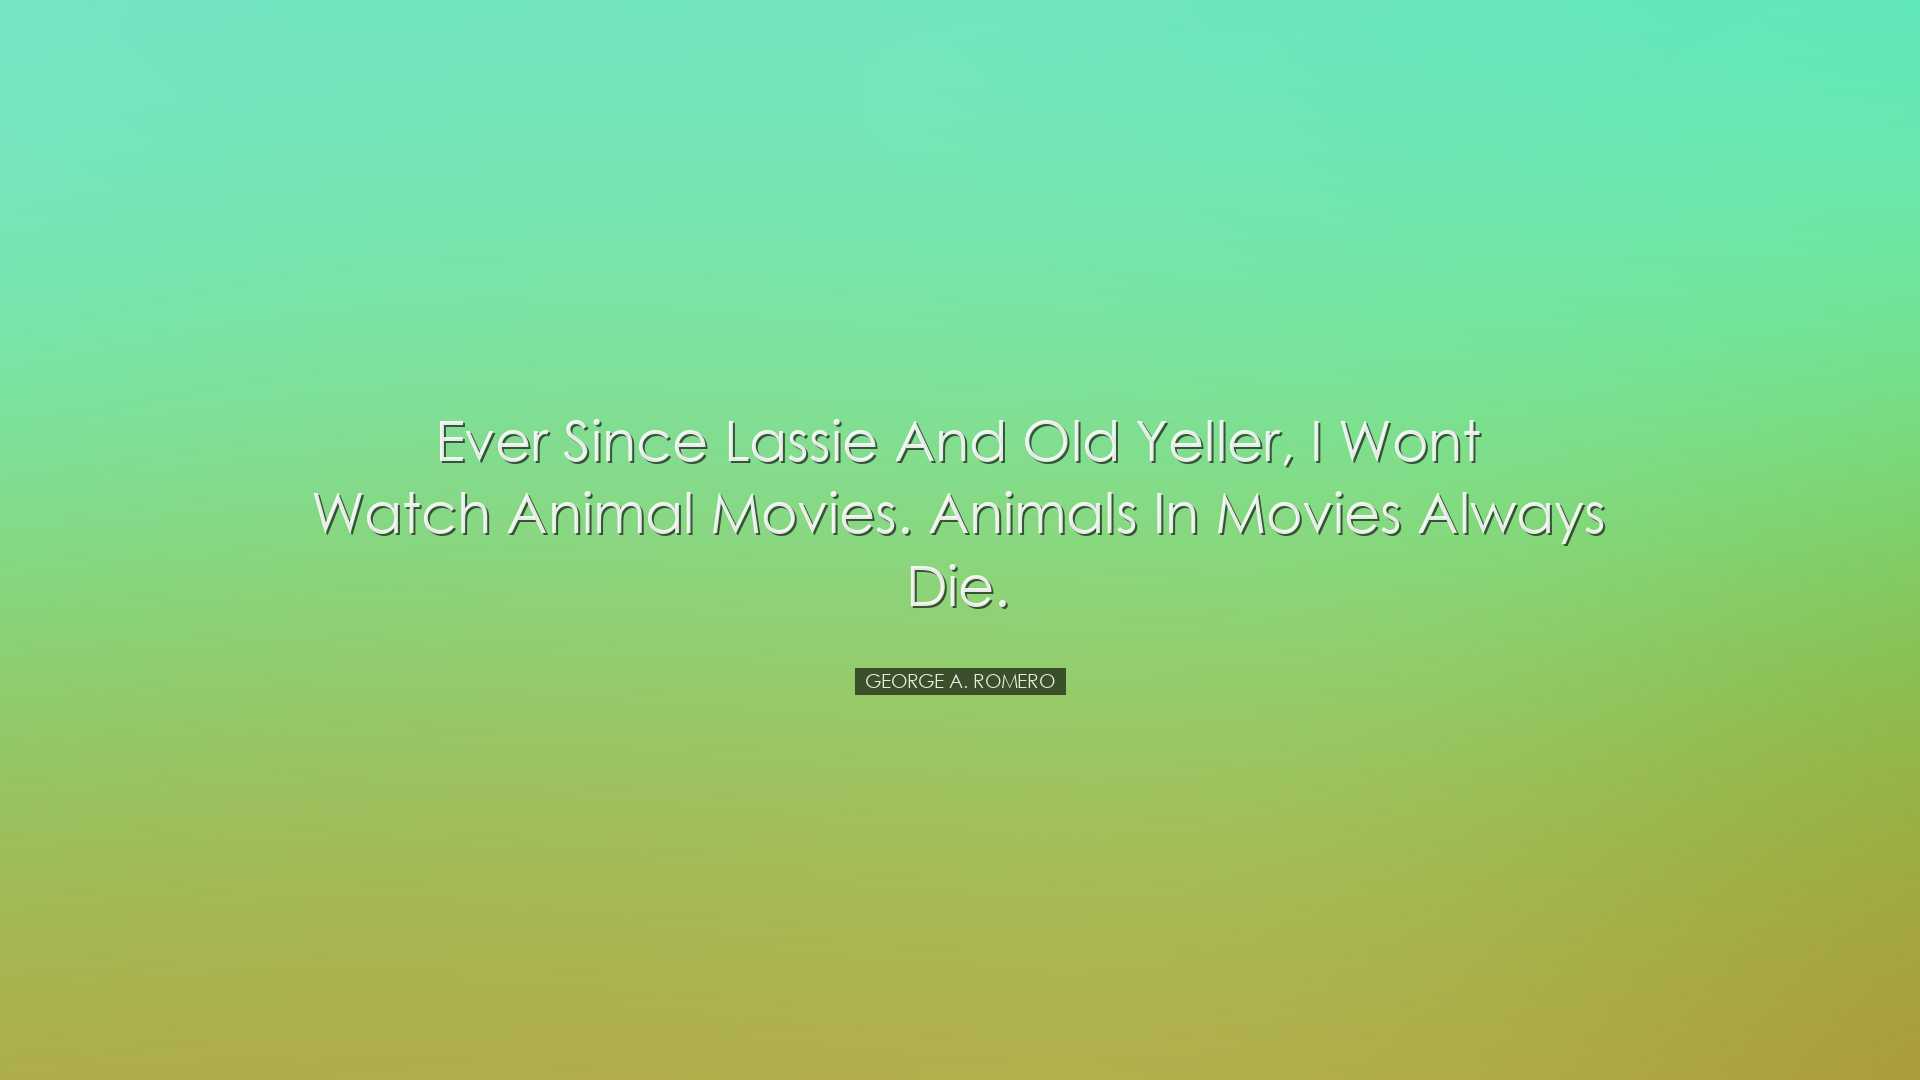 Ever since Lassie and Old Yeller, I wont watch animal movies. Anim